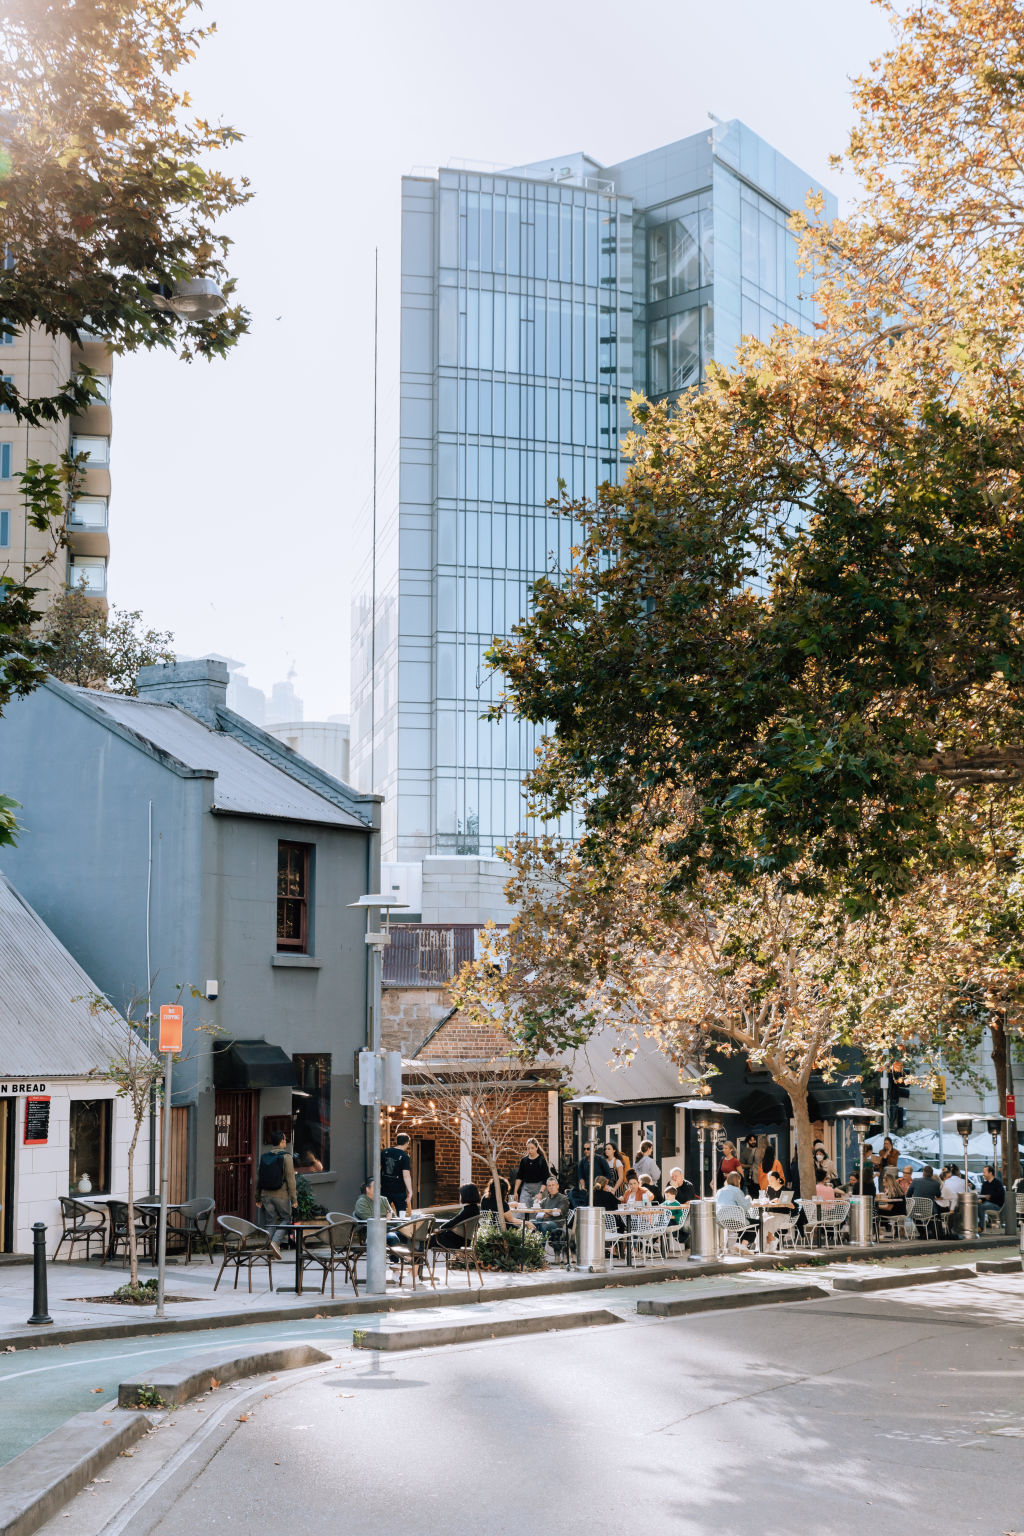 Pyrmont is filled with eateries in its heritage precinct. Photo: Vaida Savickaite